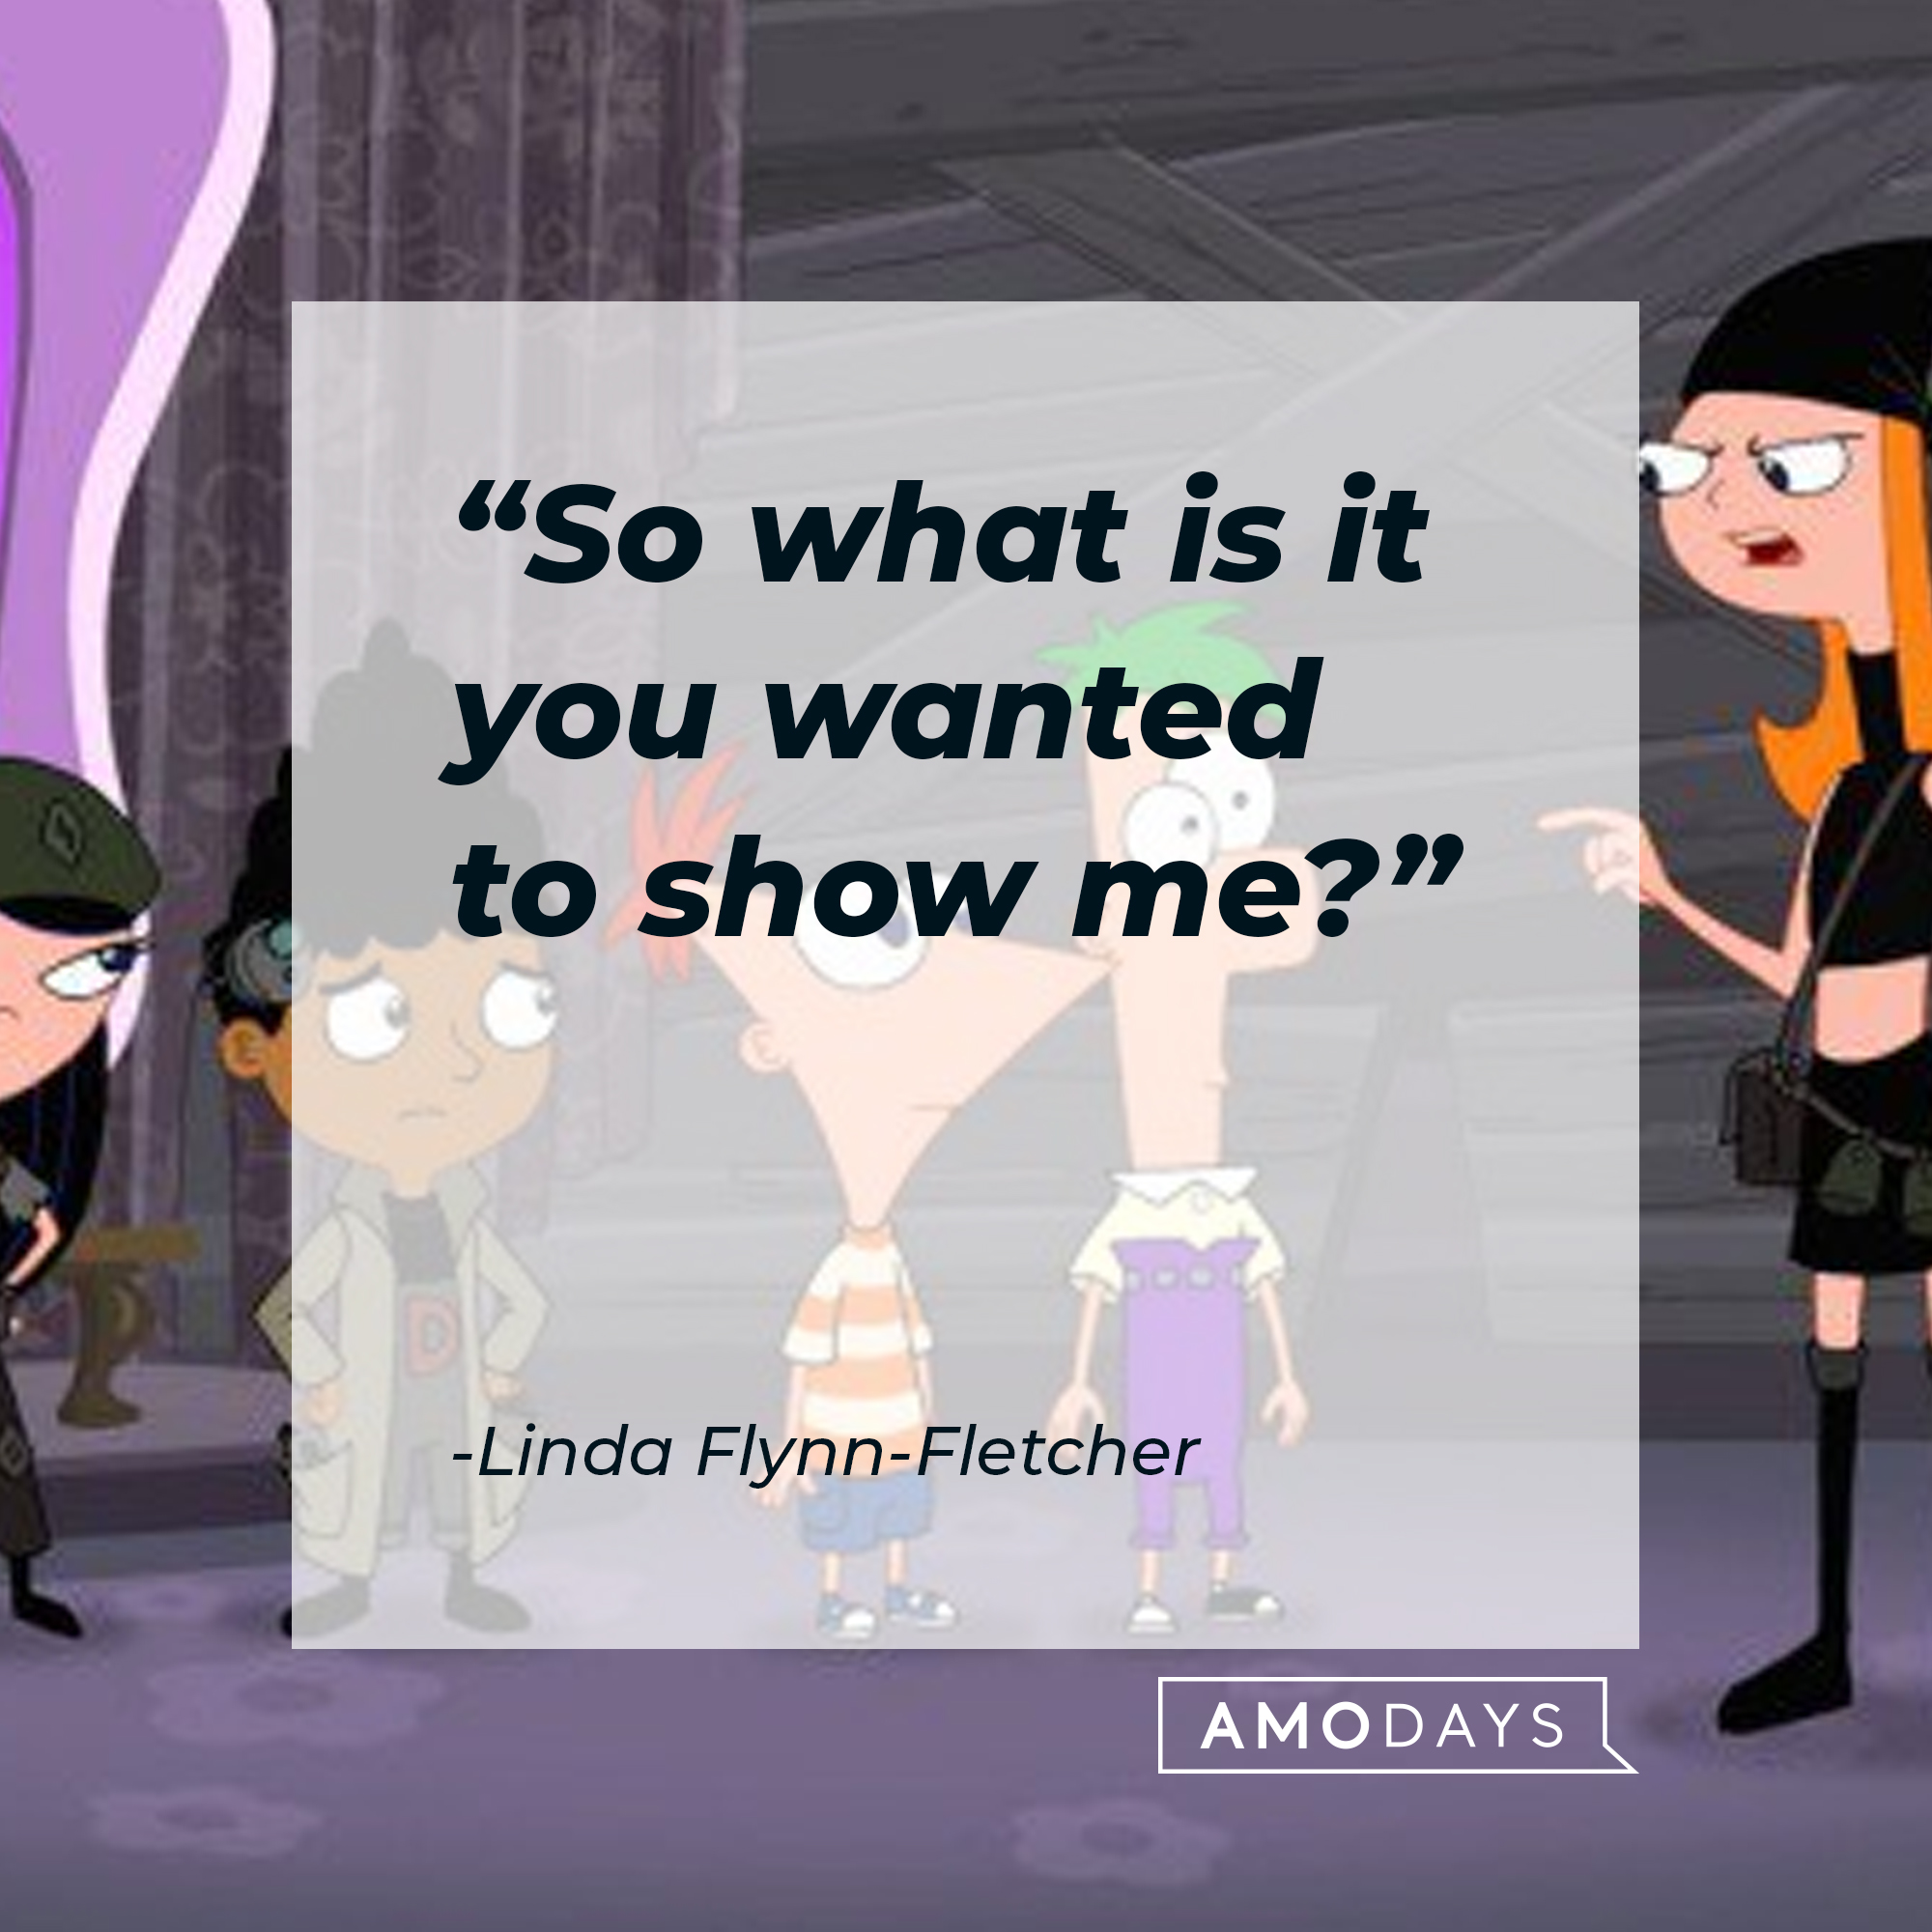 Linda Flynn Fletcher's quote: "So what is it you wanted to show me?" | Source: facebook.com/Phineas-and-Ferb